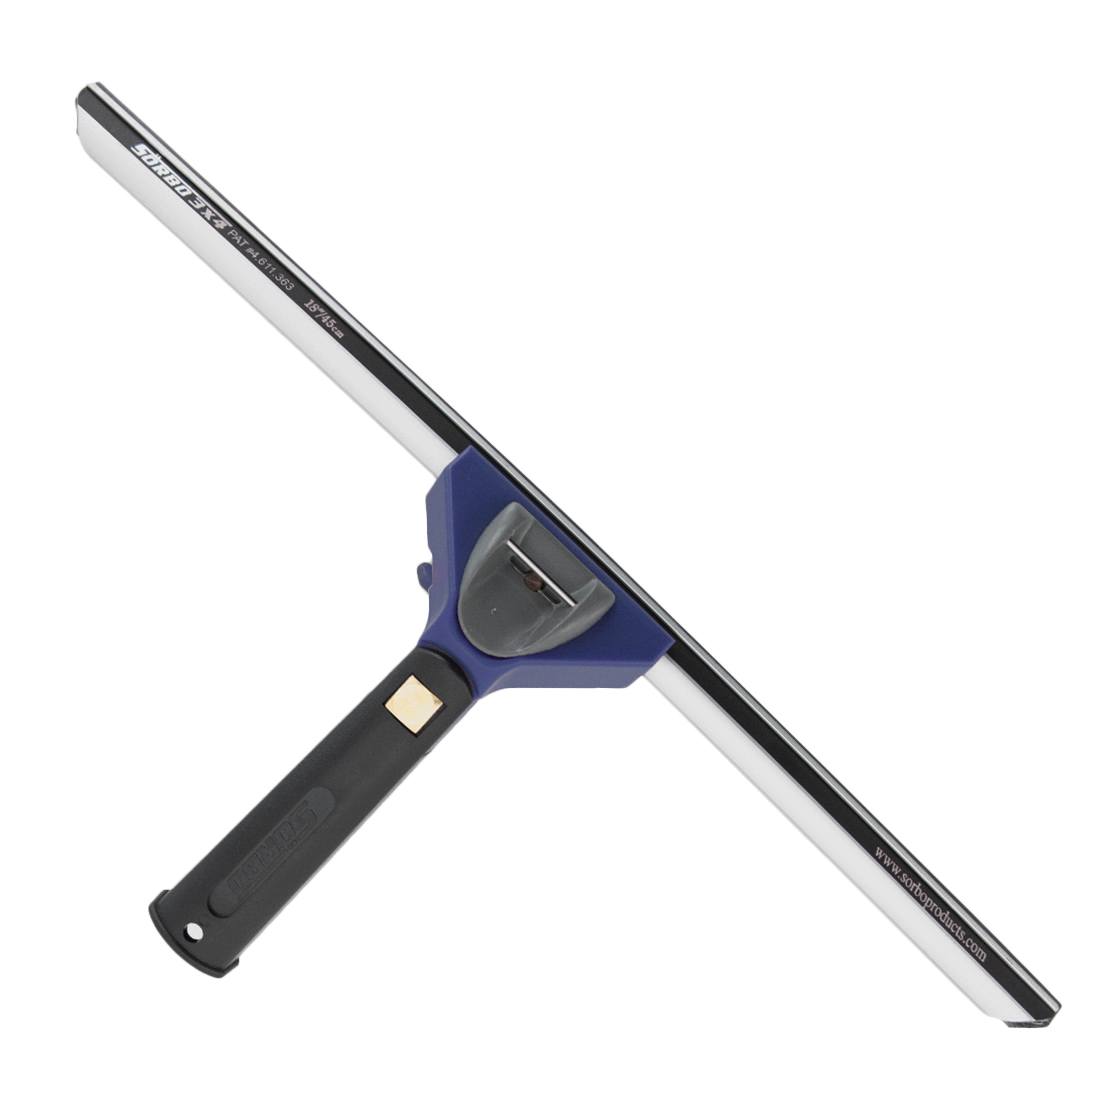 Sörbo Complete Swivel Viper Squeegee, Complete Tools